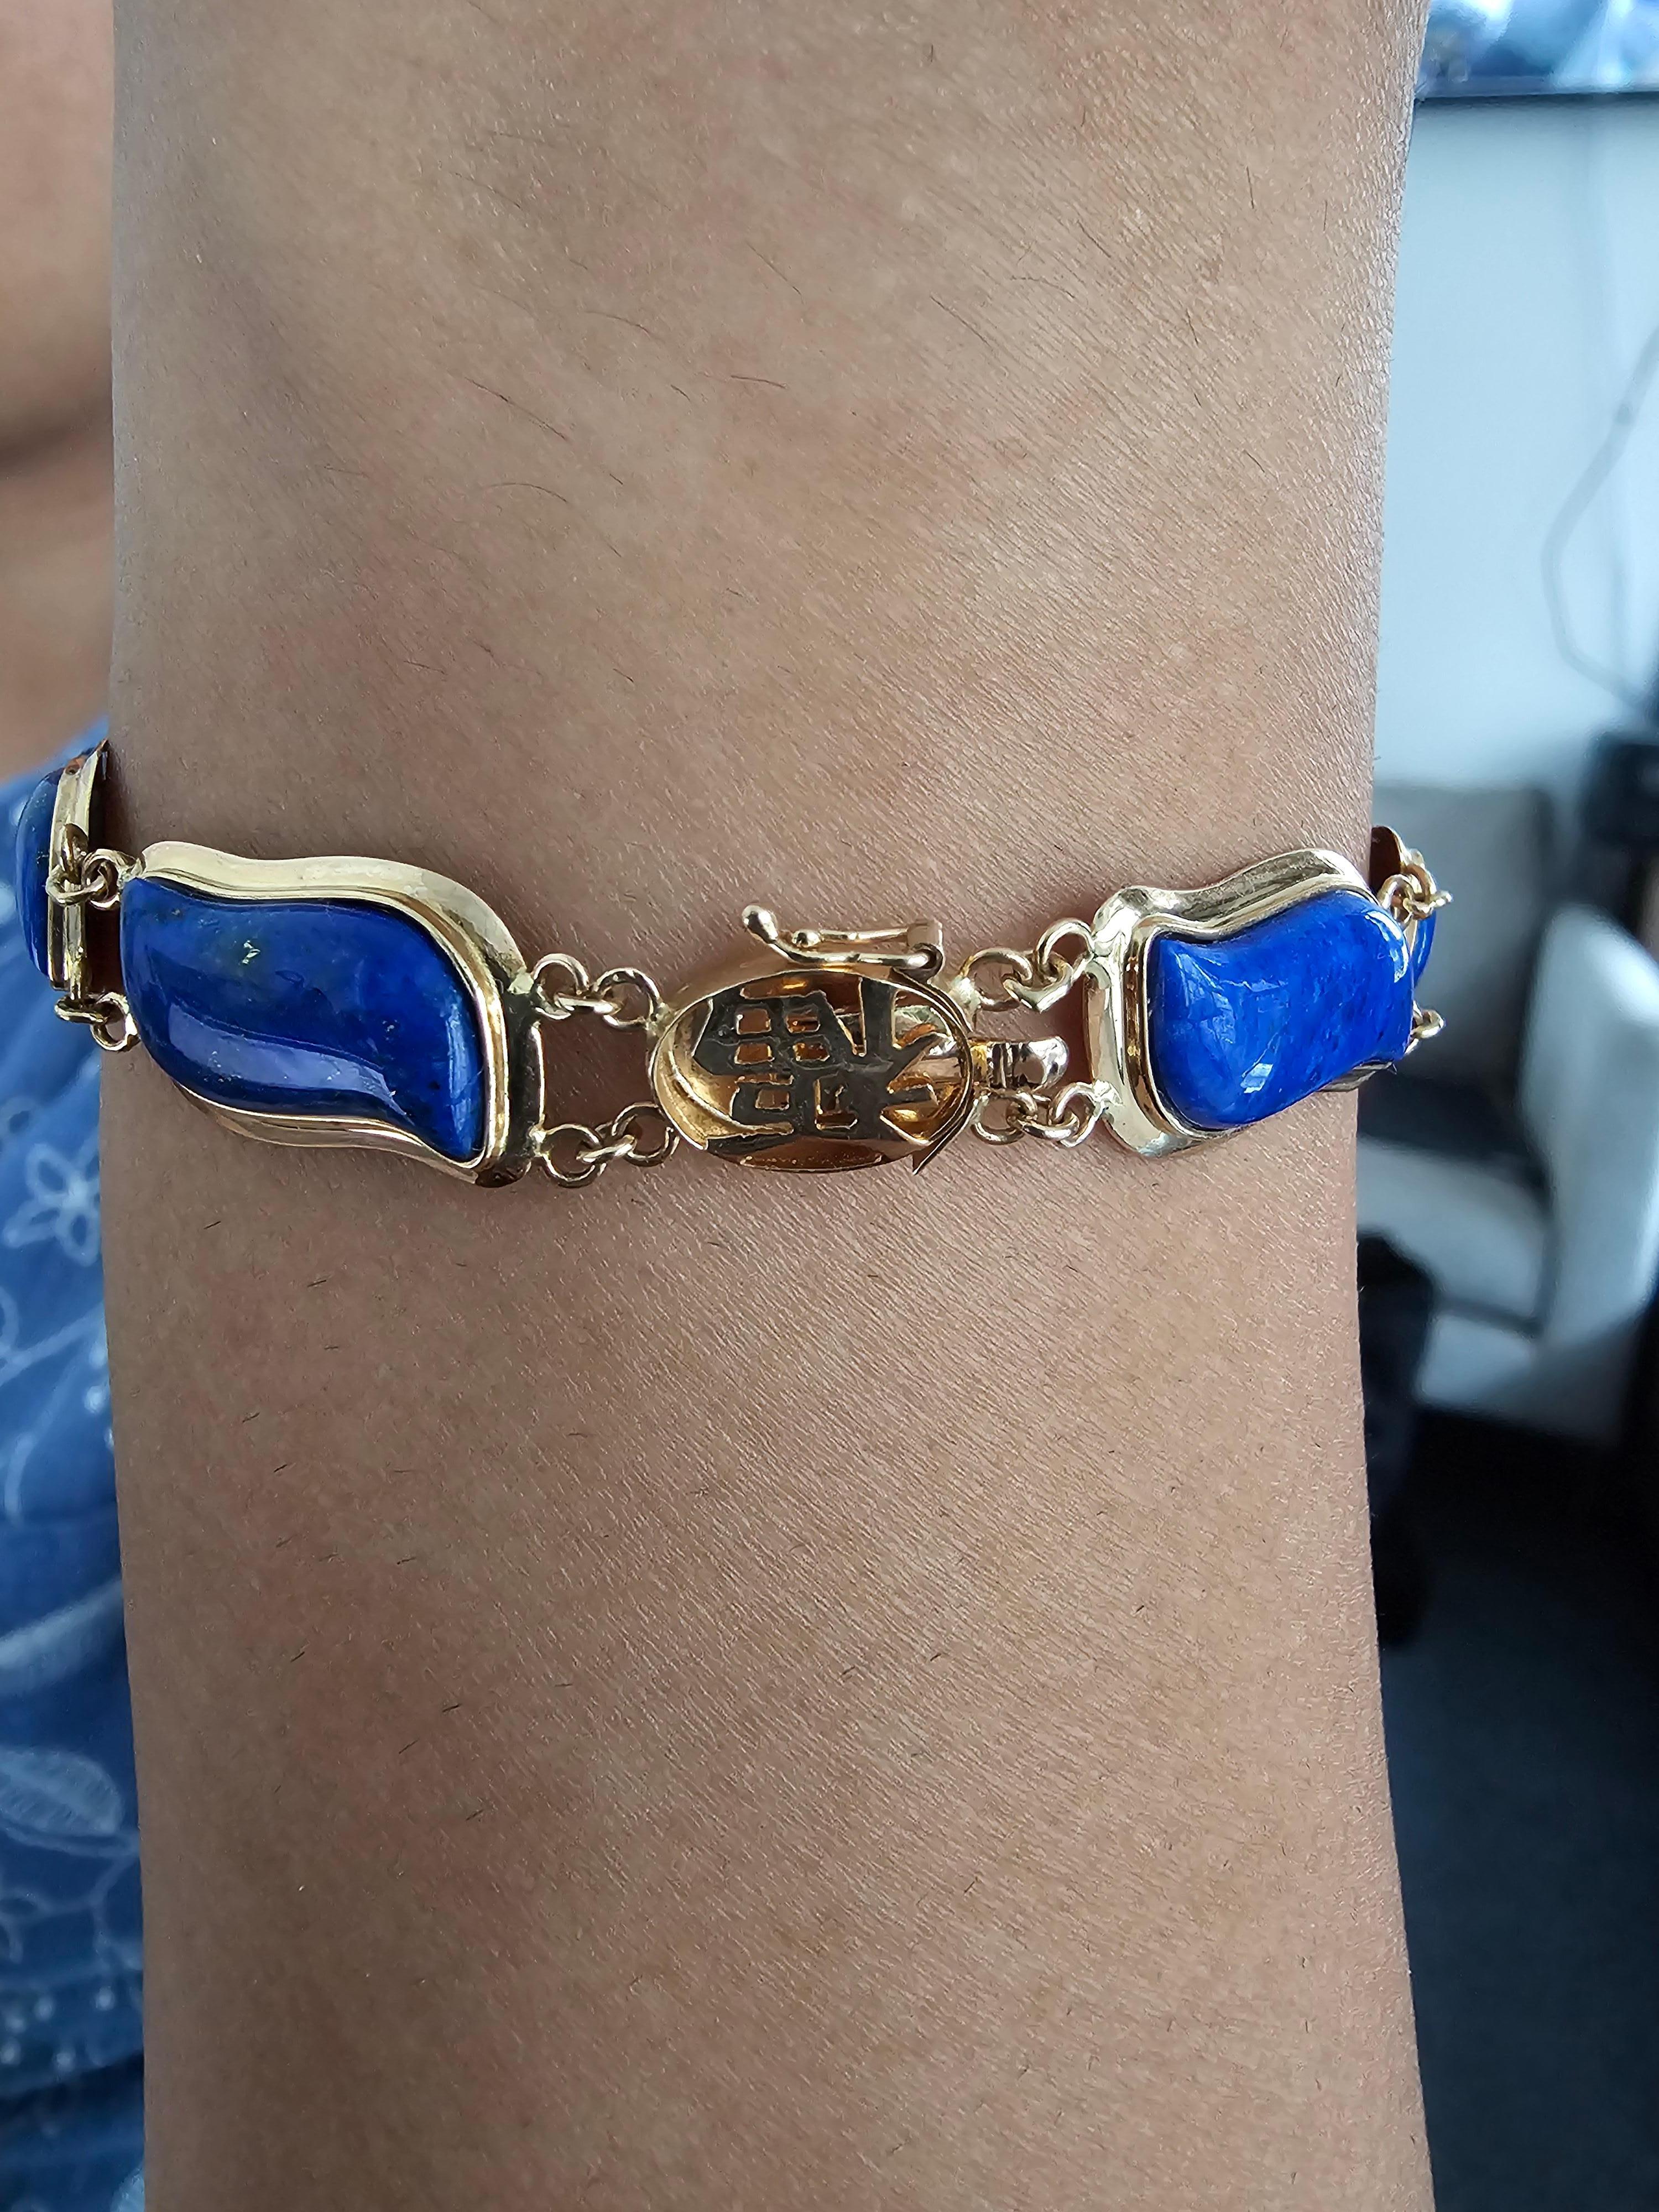 Blue Lapis Lazuli Bracelet Aurora Double Chained with 14K Solid Yellow Gold links and clasp. 

Using the natural Palette of Lapis Lazuli, and contrasting it with yellow gold, we created a bracelet that mirrors the Aurora Borealis. We grappled Lapis